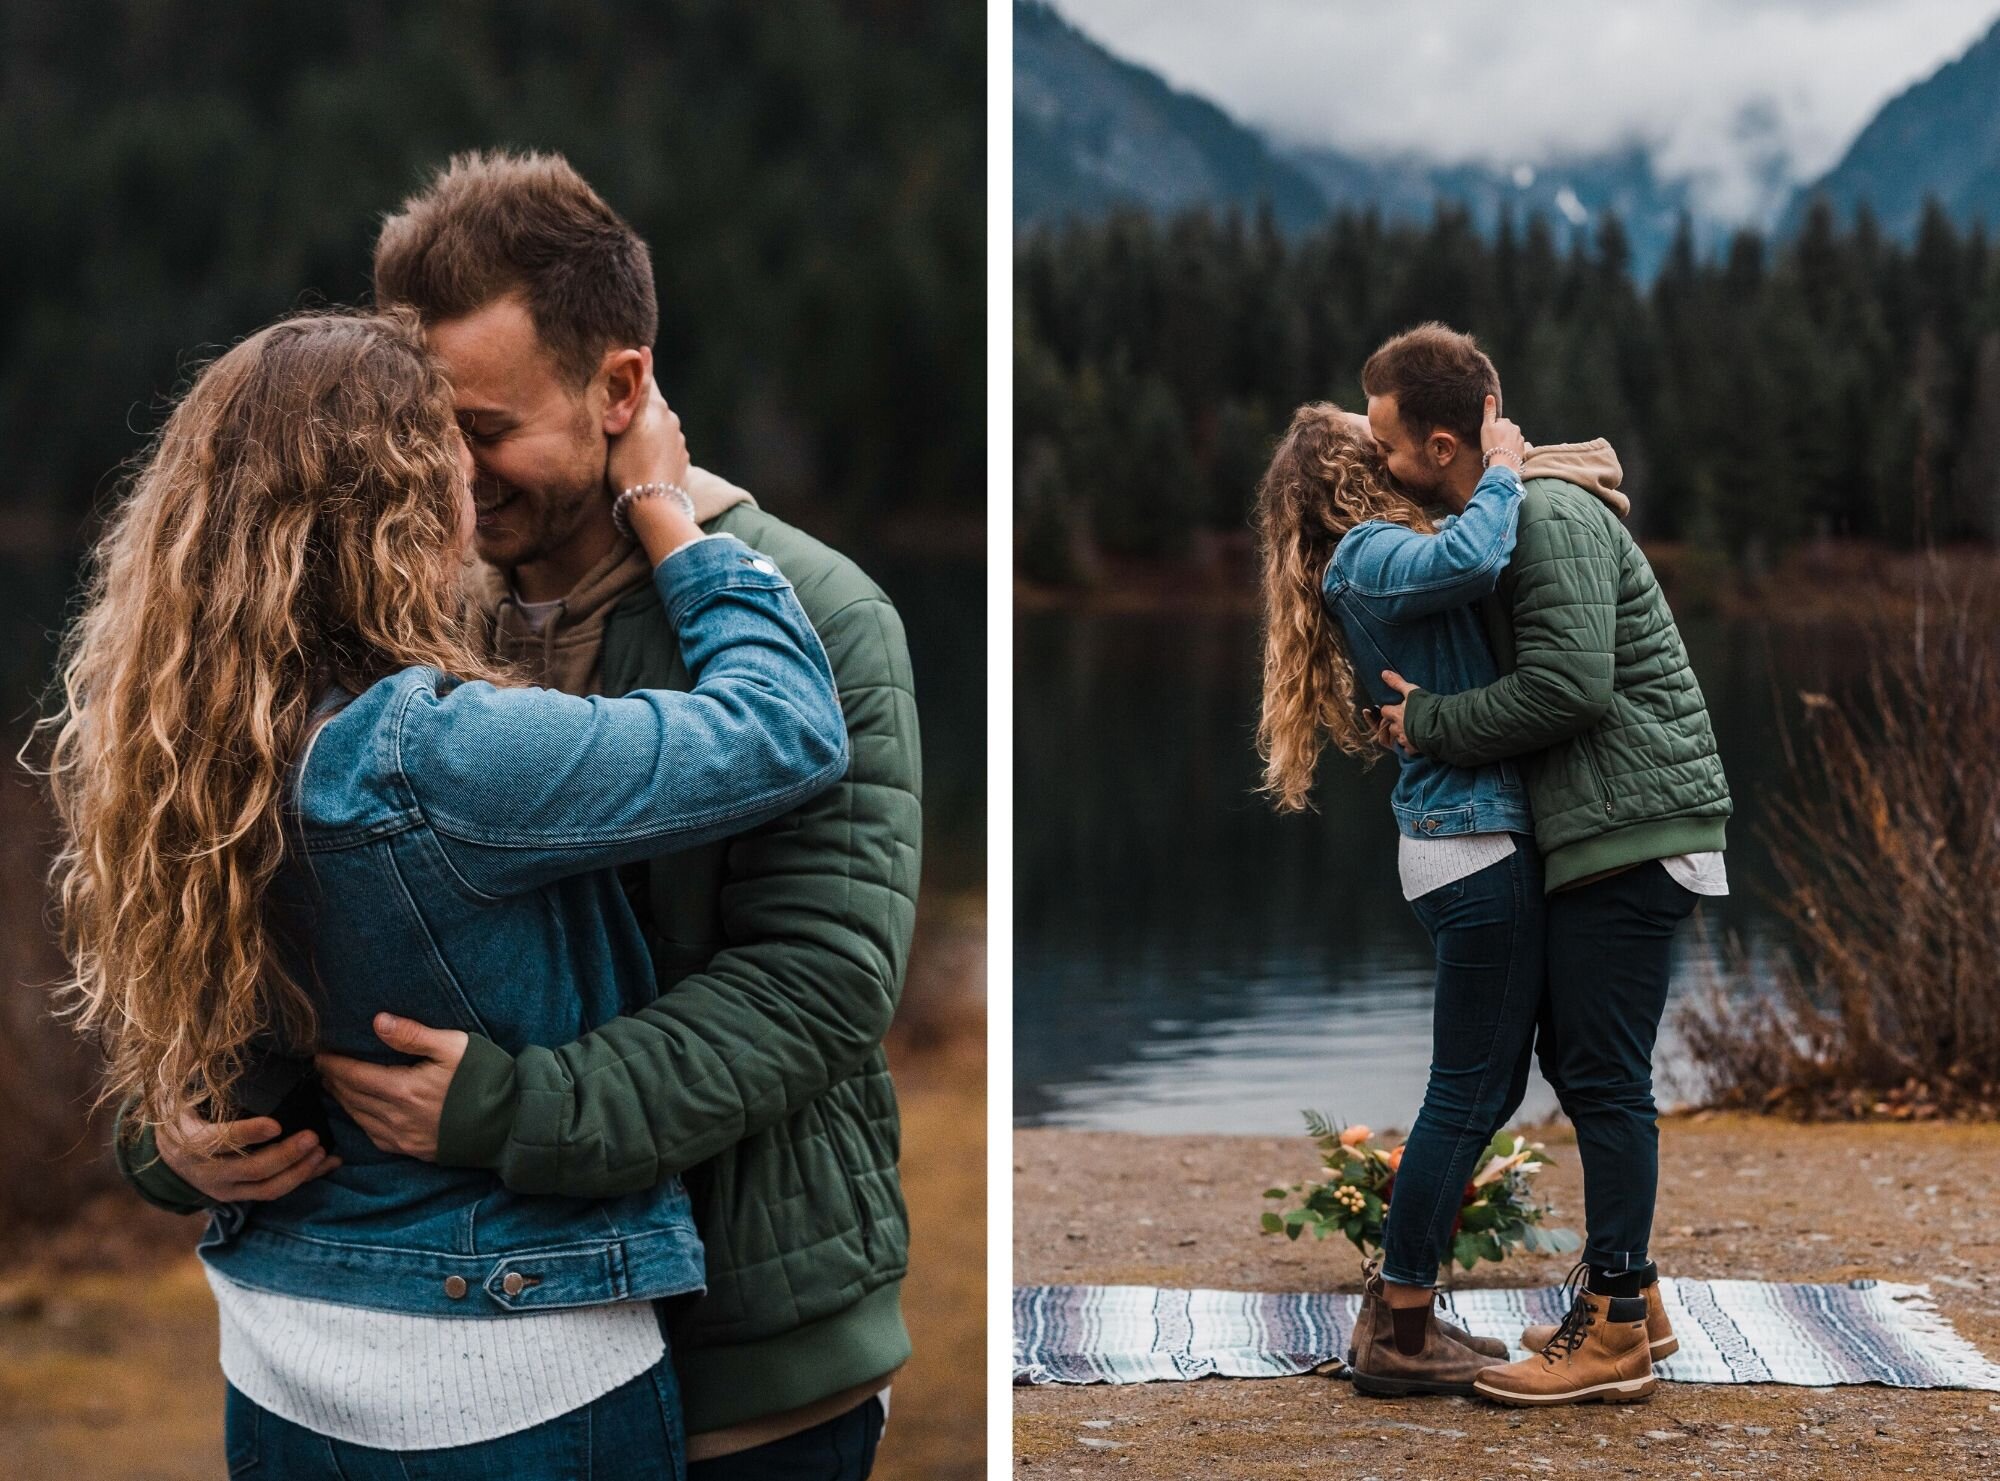 Mountaintop Surprise Proposal at Gold Creek Pond | Between the Pine Adventure Elopement Photography